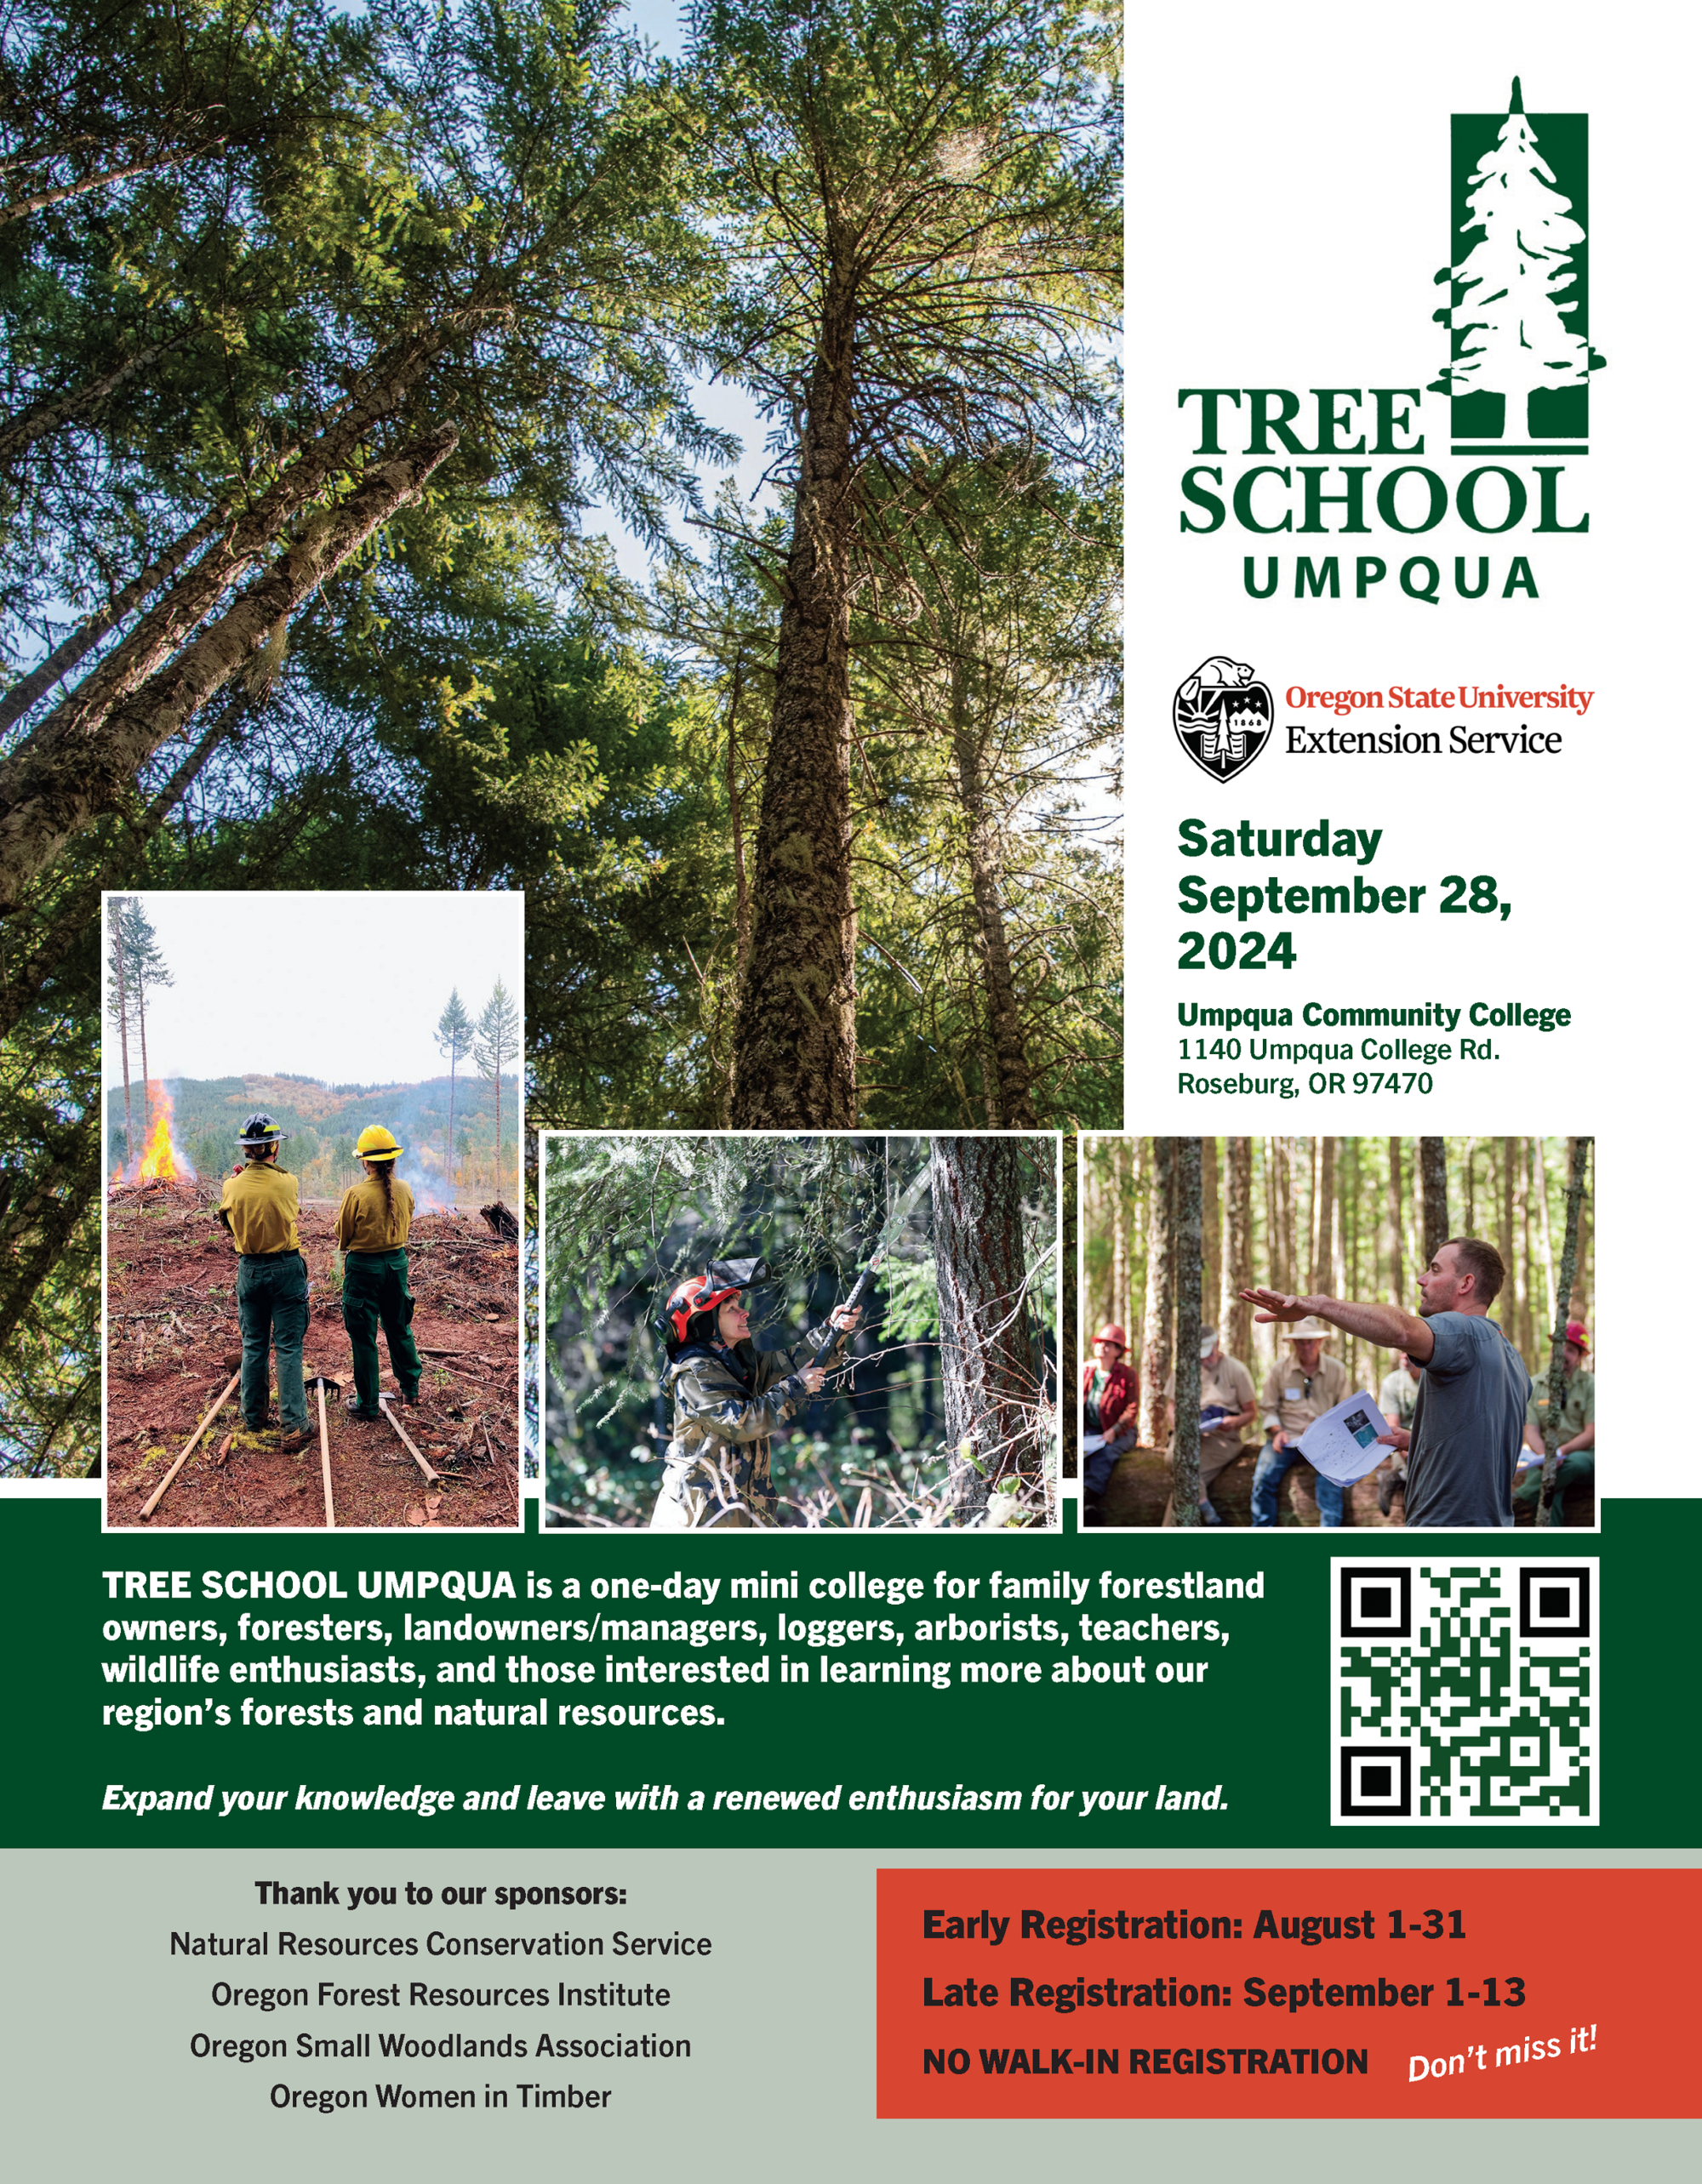 2024 Tree School Umpqua Flyer, September 28, 2024 at Umpqua Community College, 1140 Umpqua College Rd., Roseburg. Images of forest trees and workers and educators in a forest setting. Early registration is August 1-31 and late registration is Sept. 1-13.